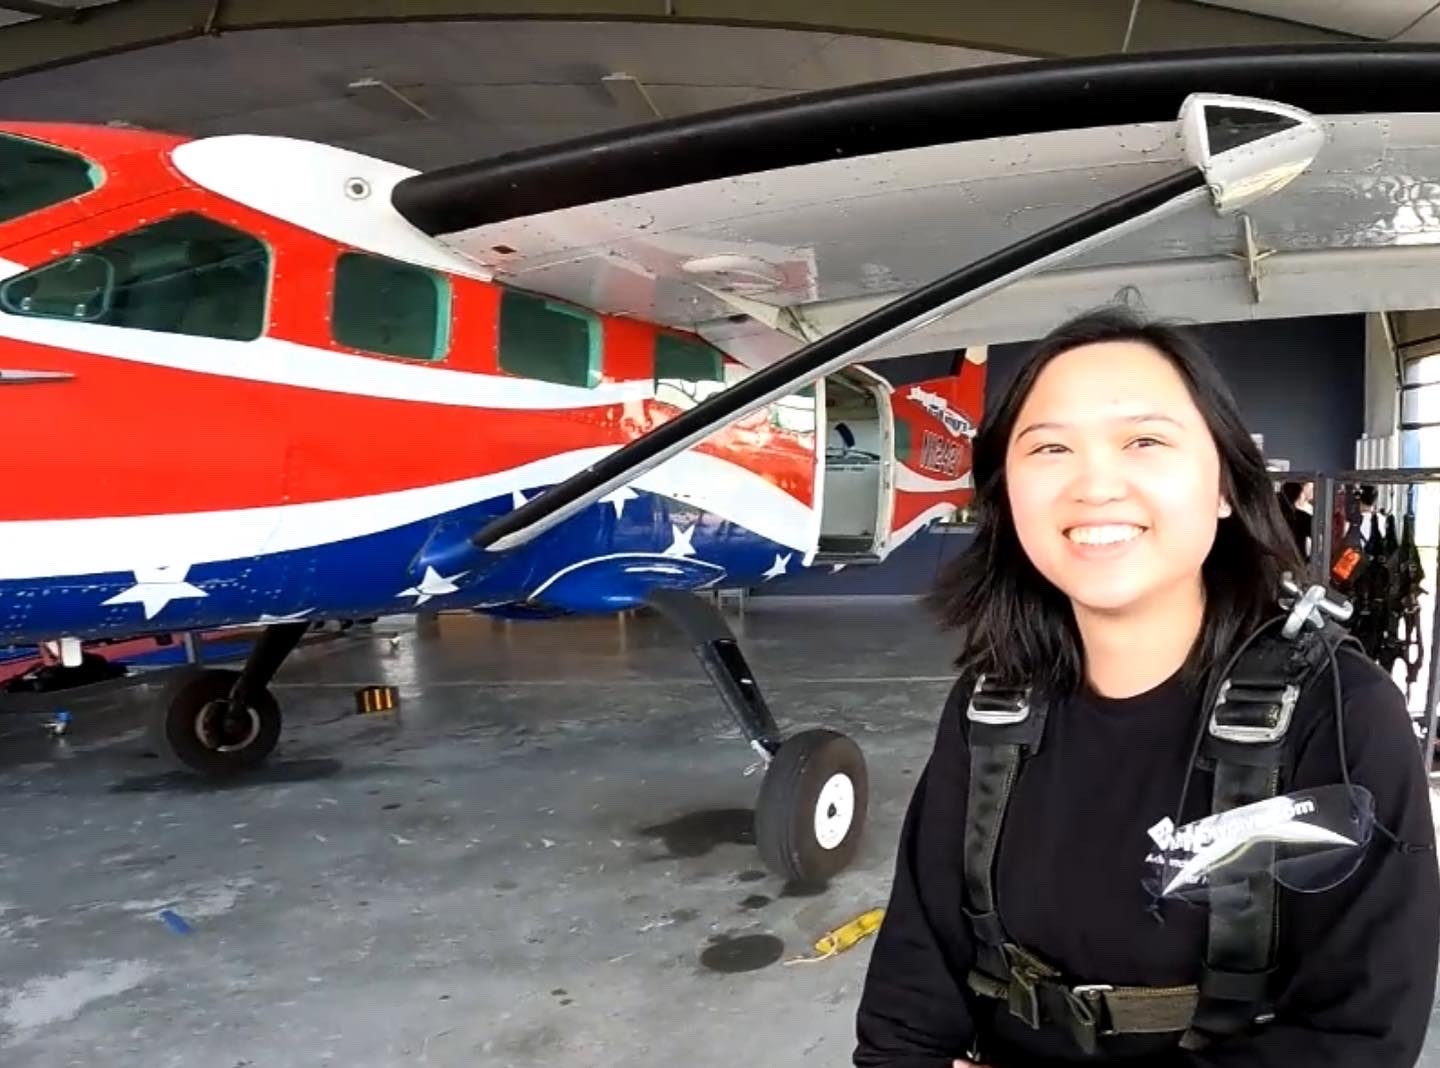 A woman smiles next to a patriotic airplane